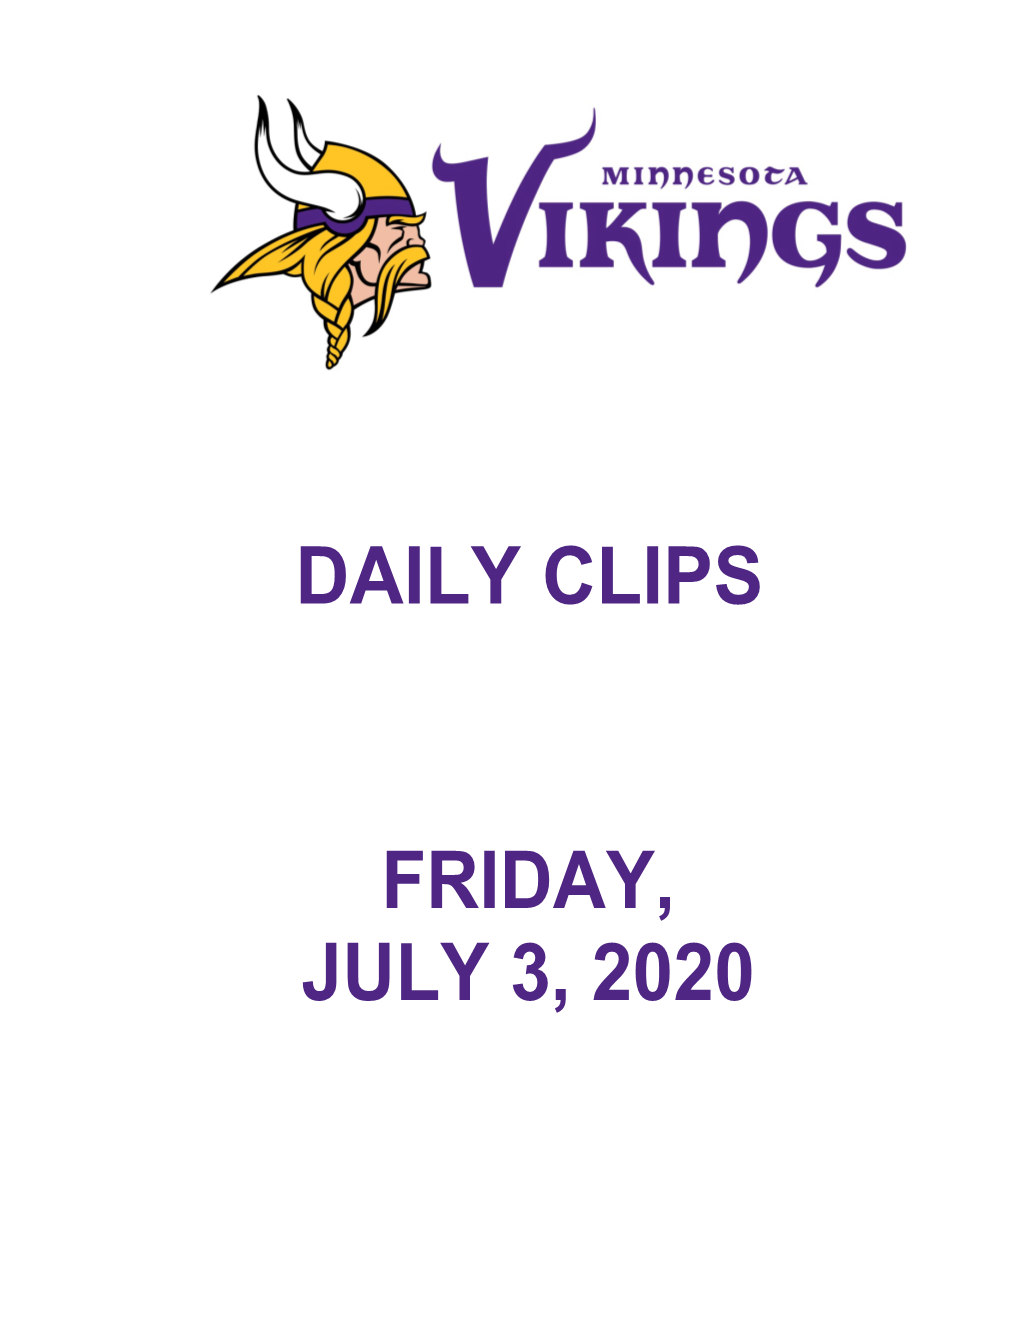 Daily Clips Friday, July 3, 2020